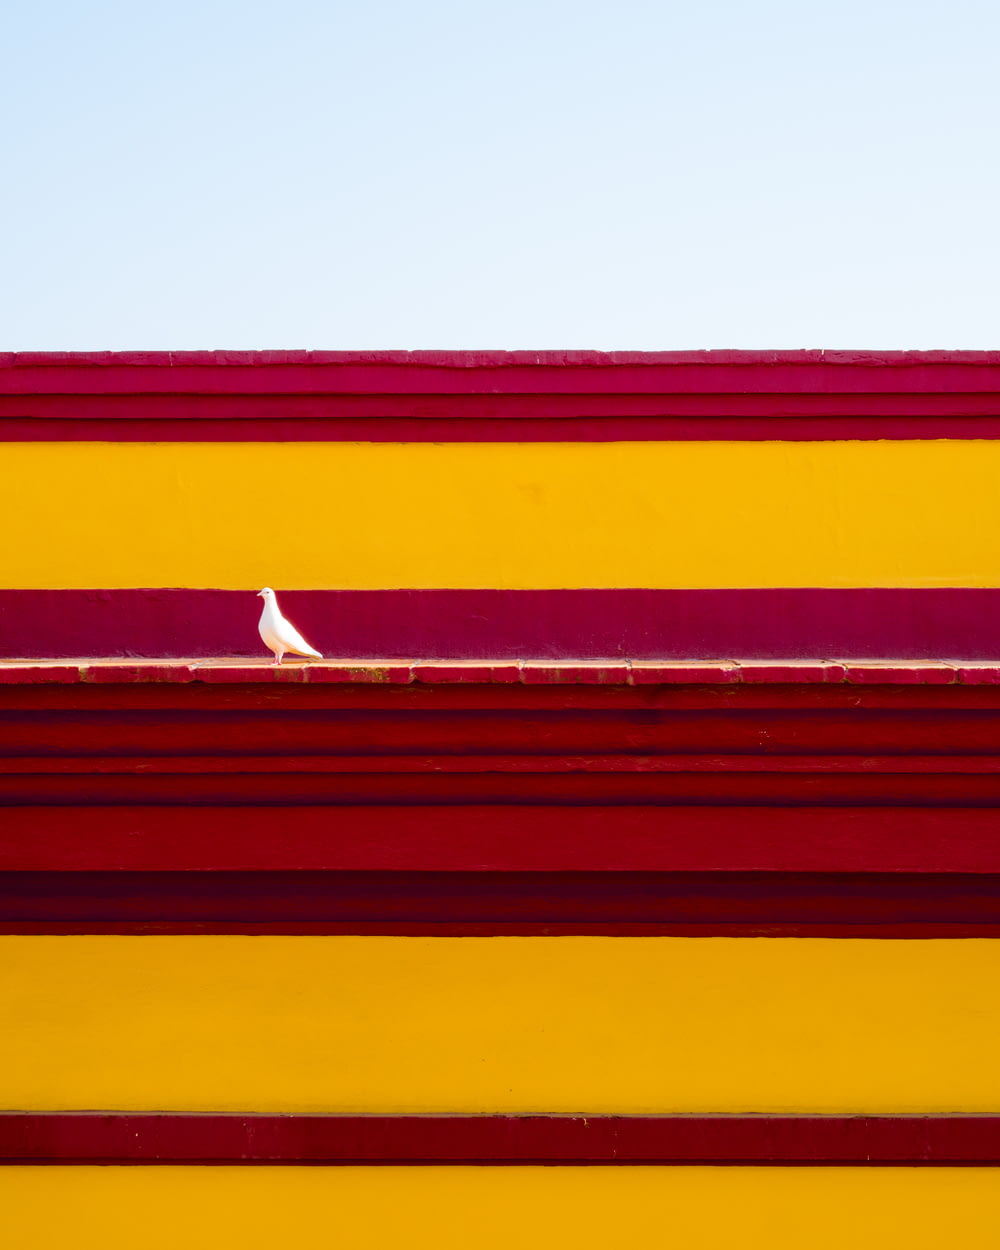 a white bird sitting on top of a red and yellow building